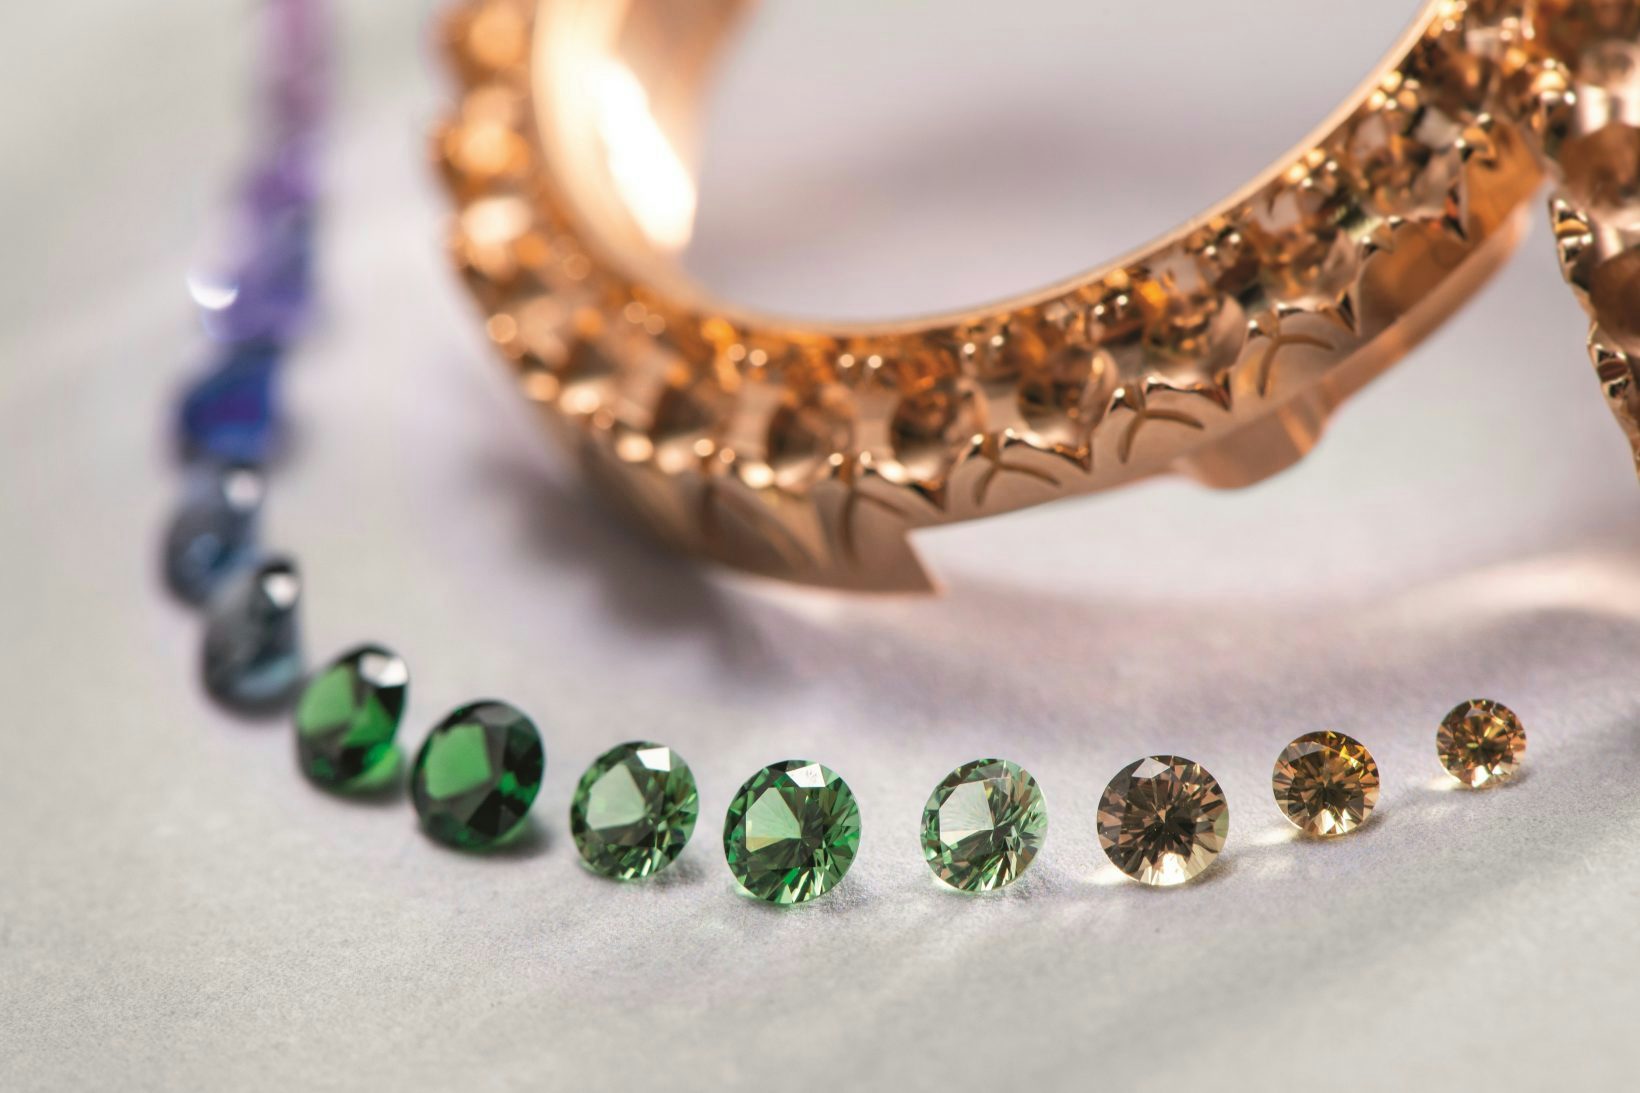 “Thanks to its knowledge of the gemstone market, Piaget is now able to stay one step ahead of the biggest Maisons”